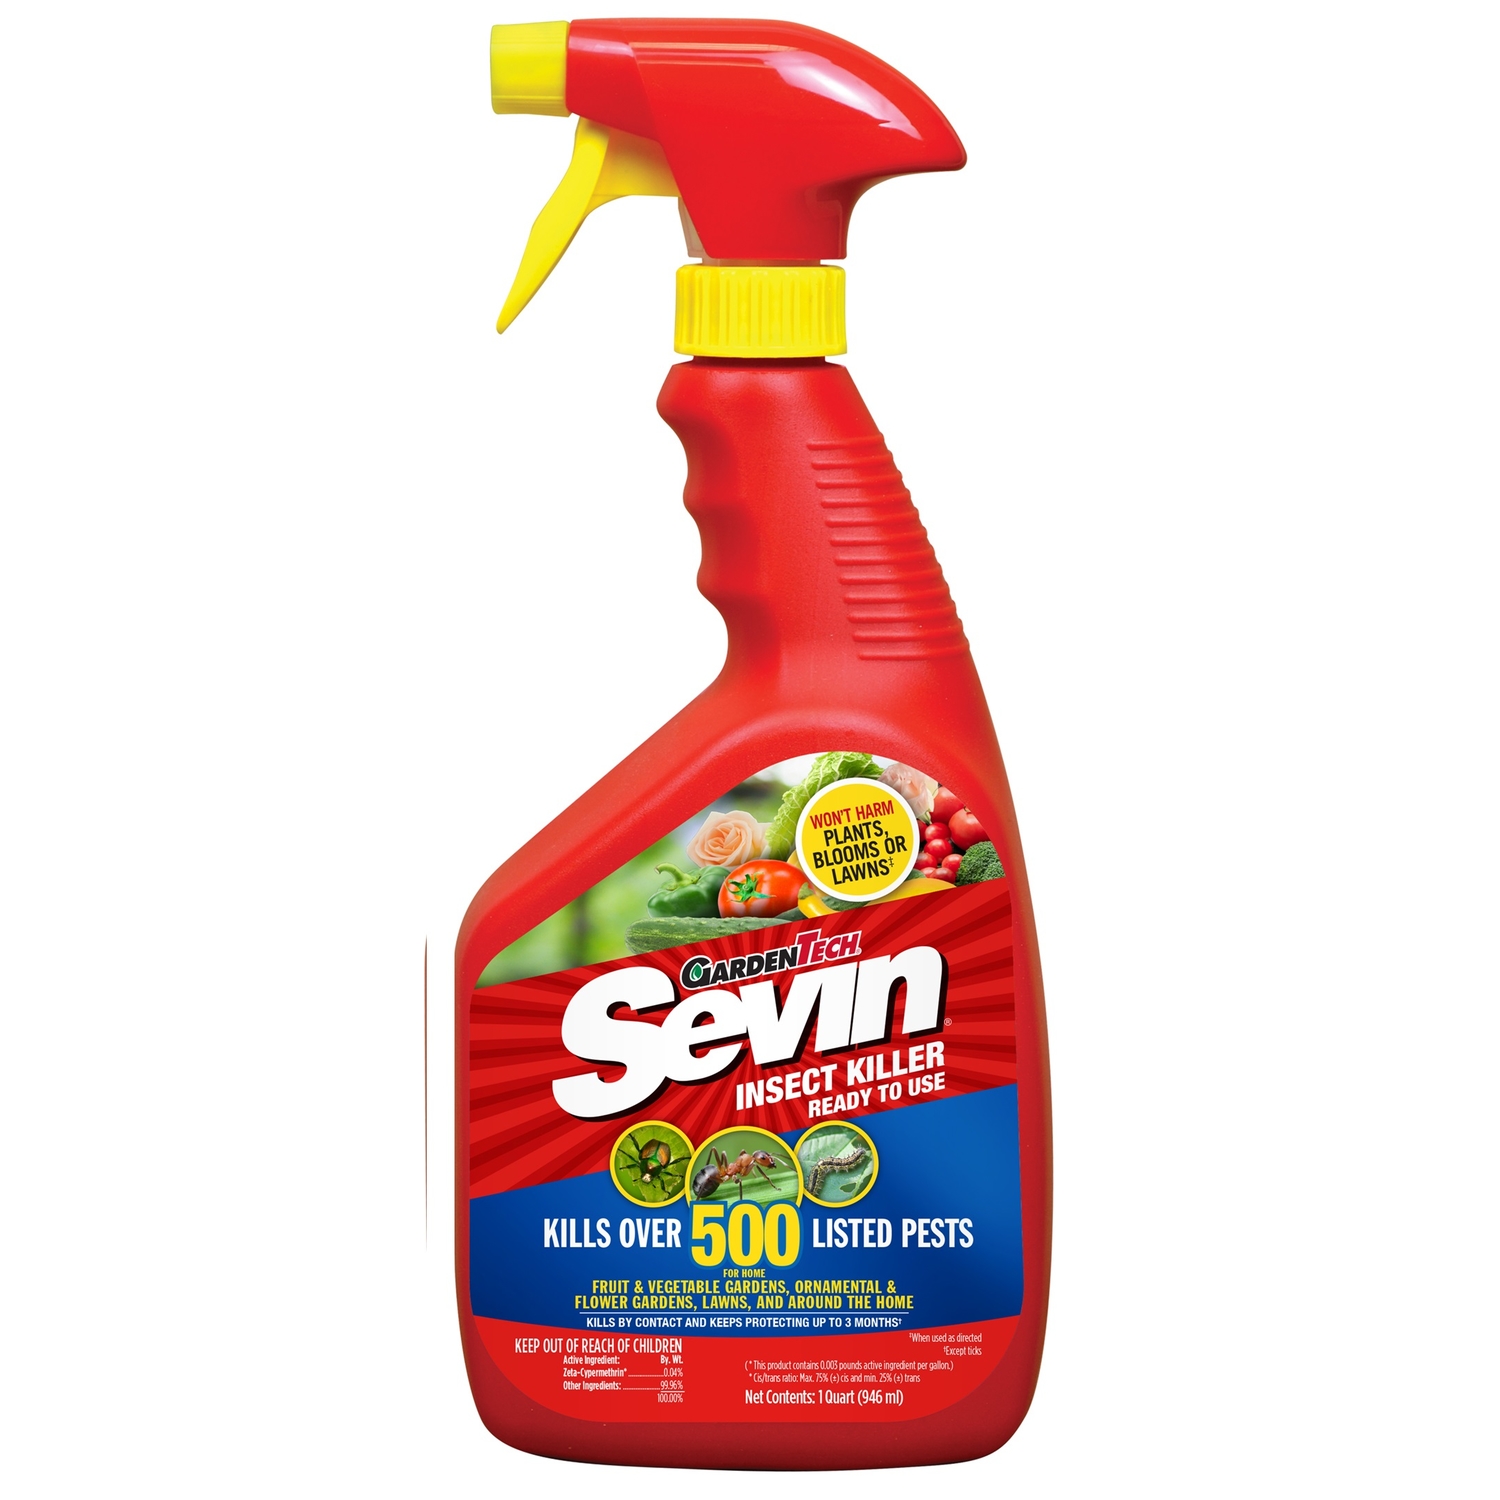 UPC 613499010117 product image for Sevin Insect Killer 1 qt. | upcitemdb.com